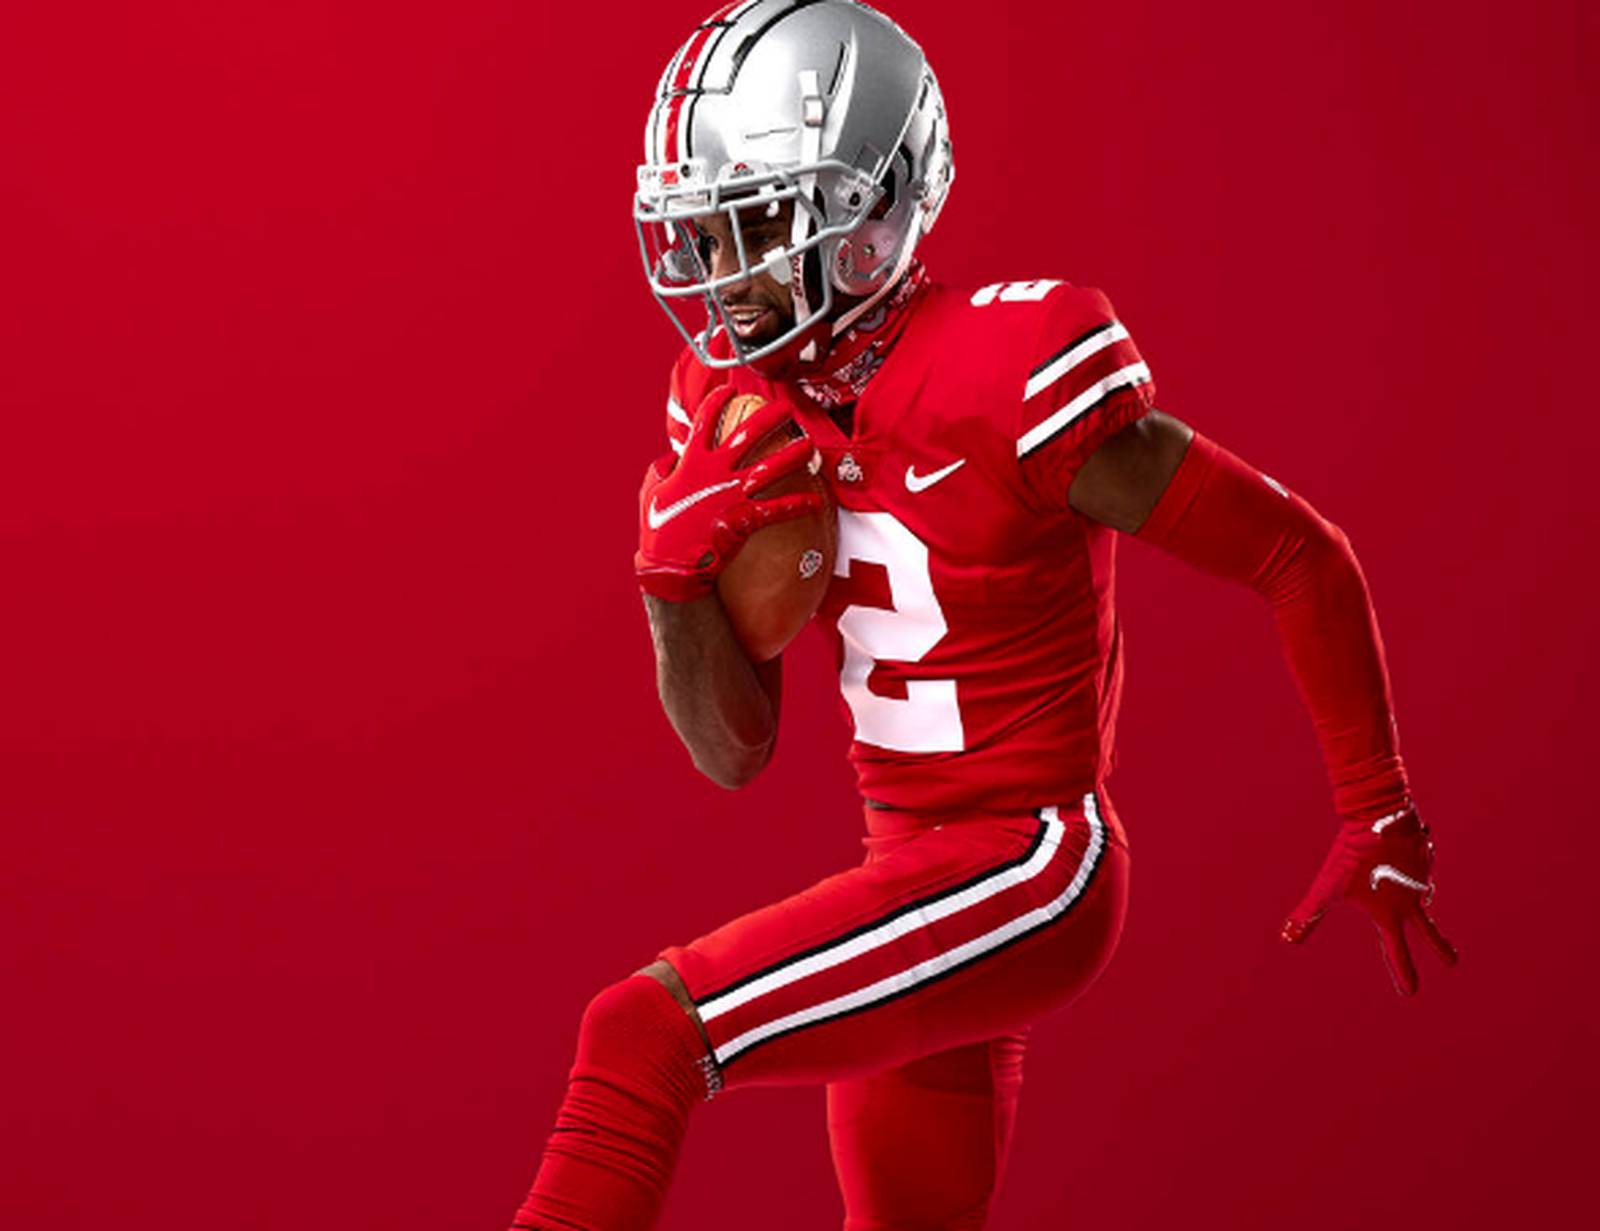 Ohio State introduces new ‘color rush’ uniform for Penn State game